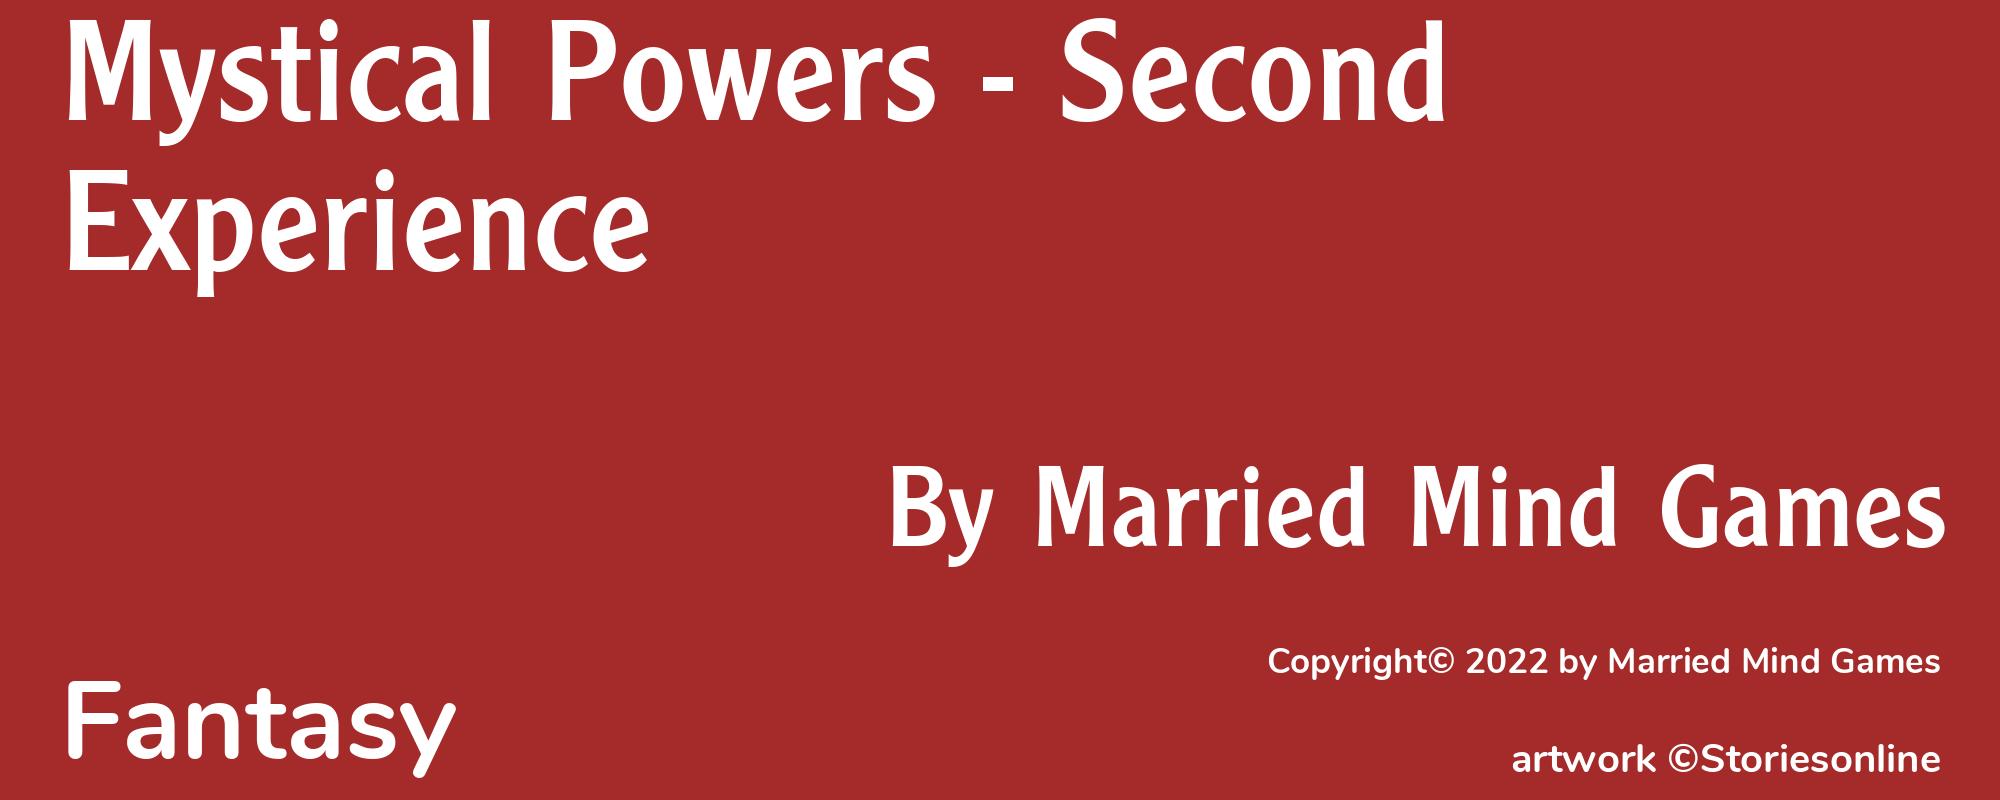 Mystical Powers - Second Experience - Cover